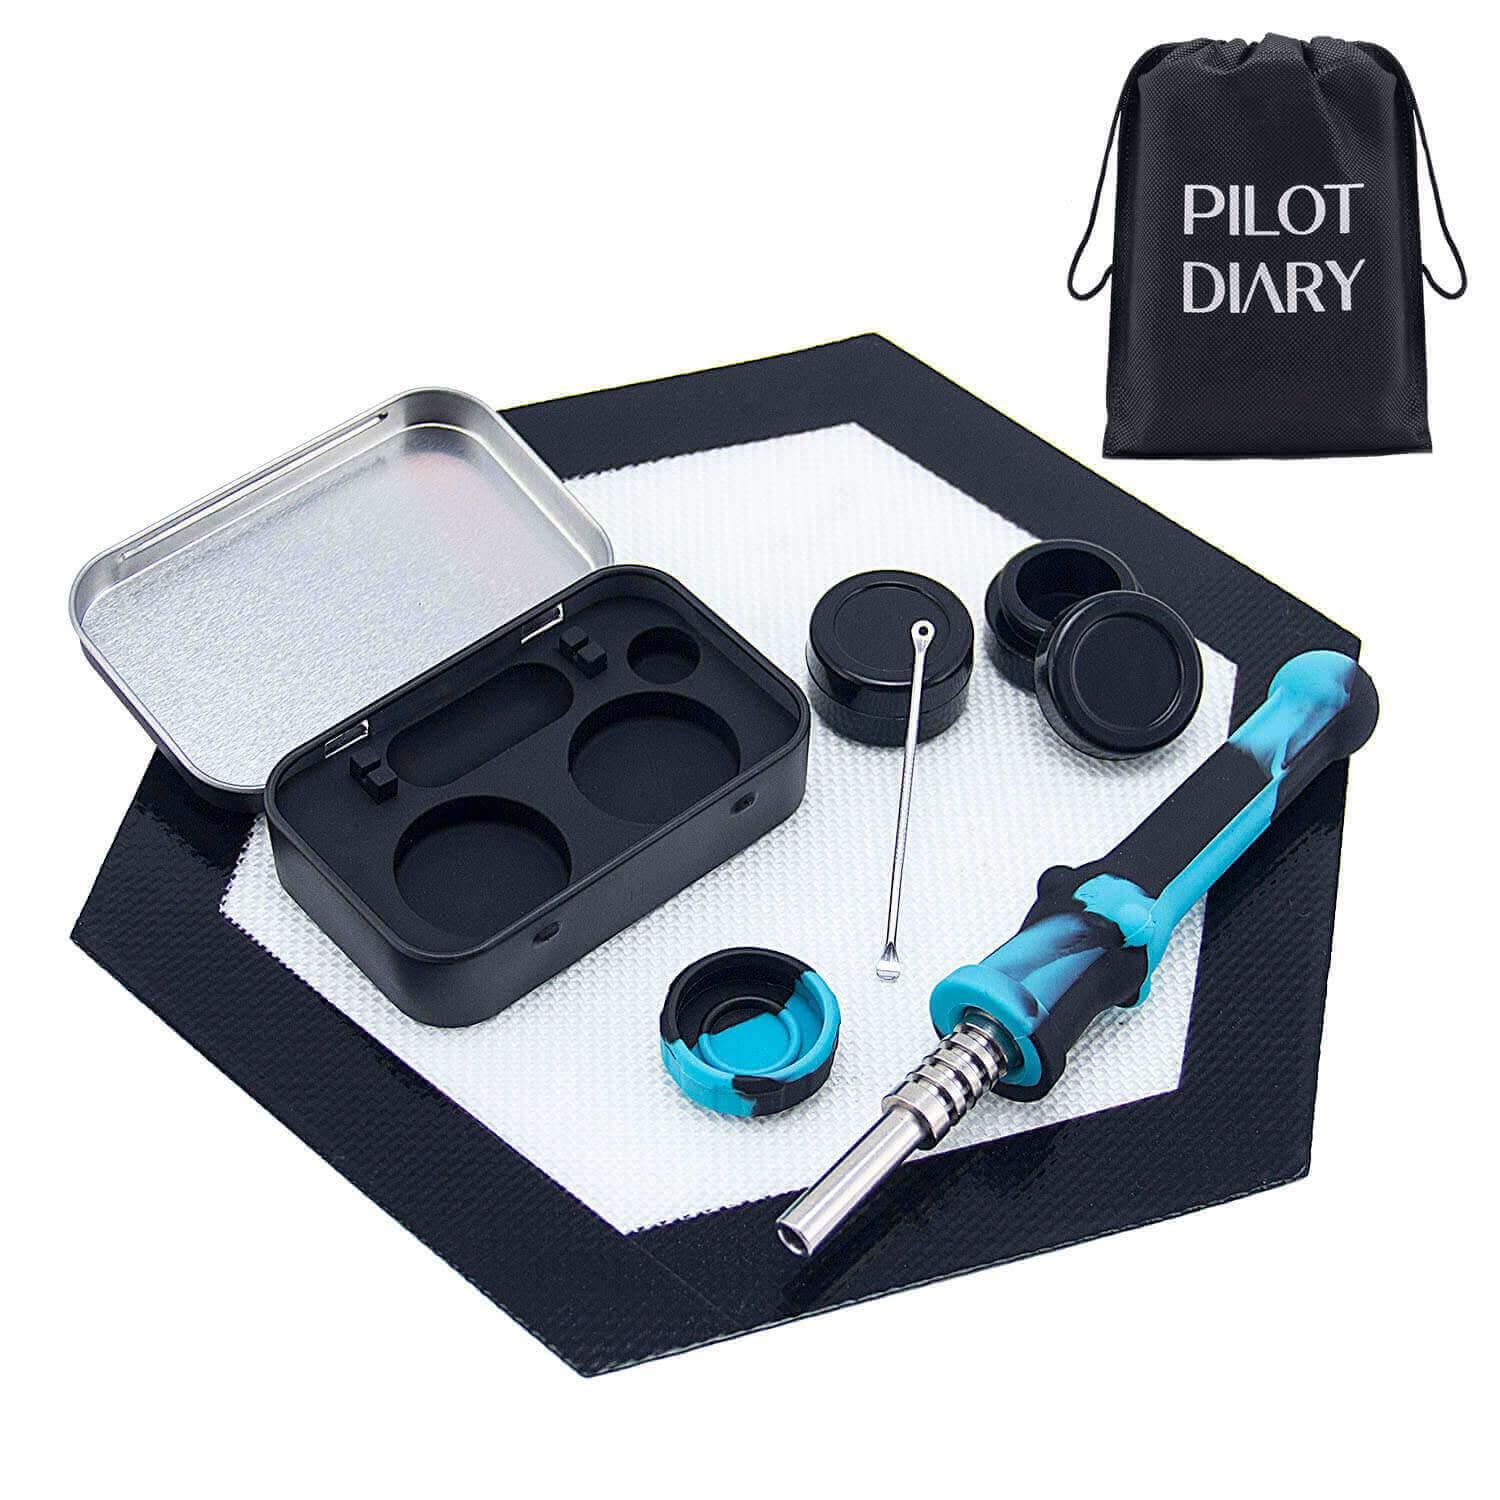 Silicone Dab Kit For Beginners - PILOT DIARY